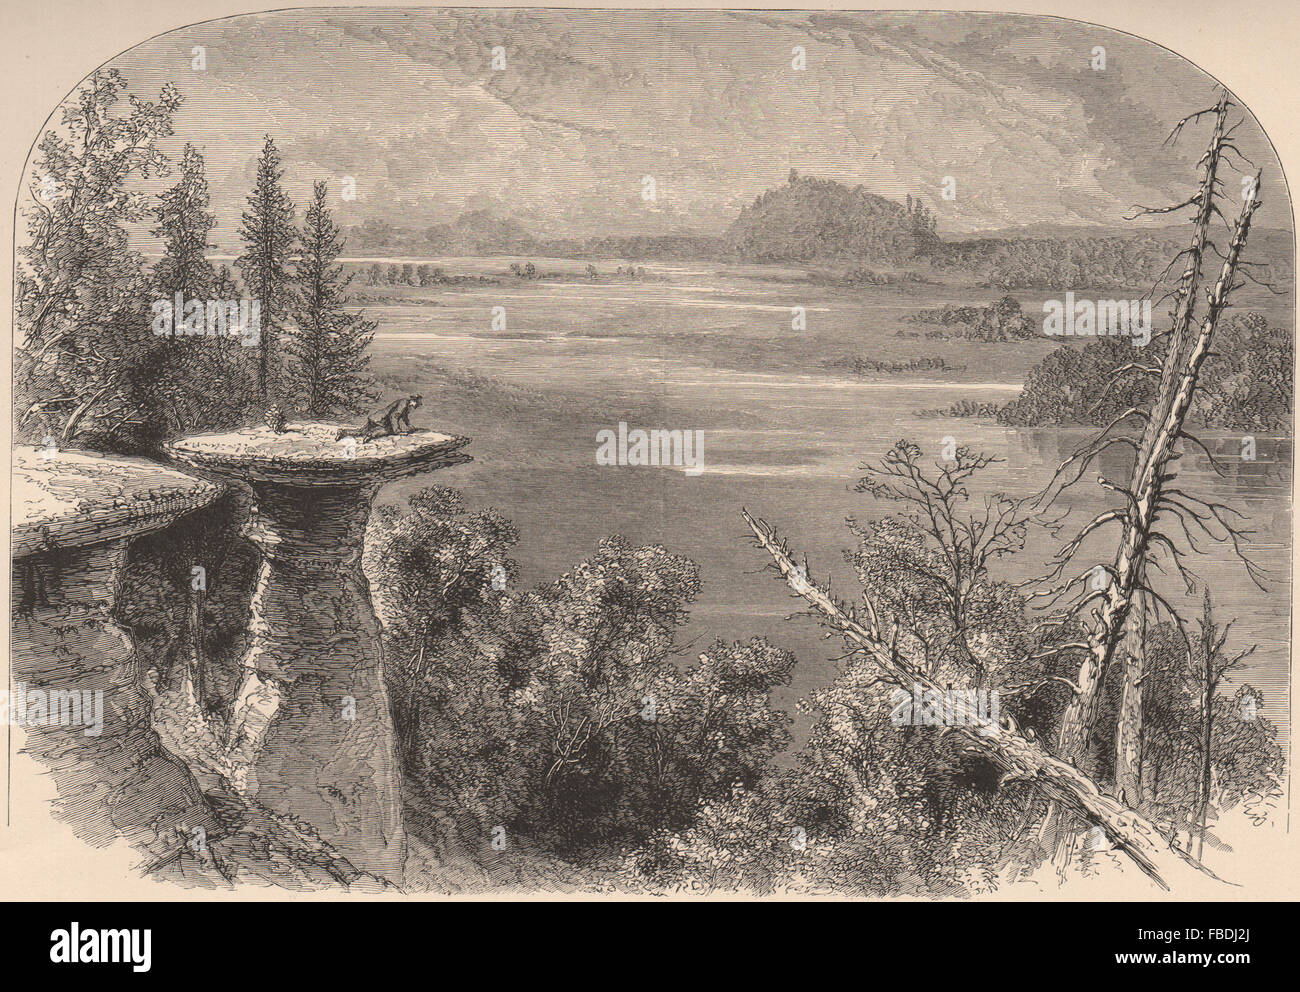 WISCONSIN: Stand Rock, on the Wisconsin River, antique print 1874 Stock Photo